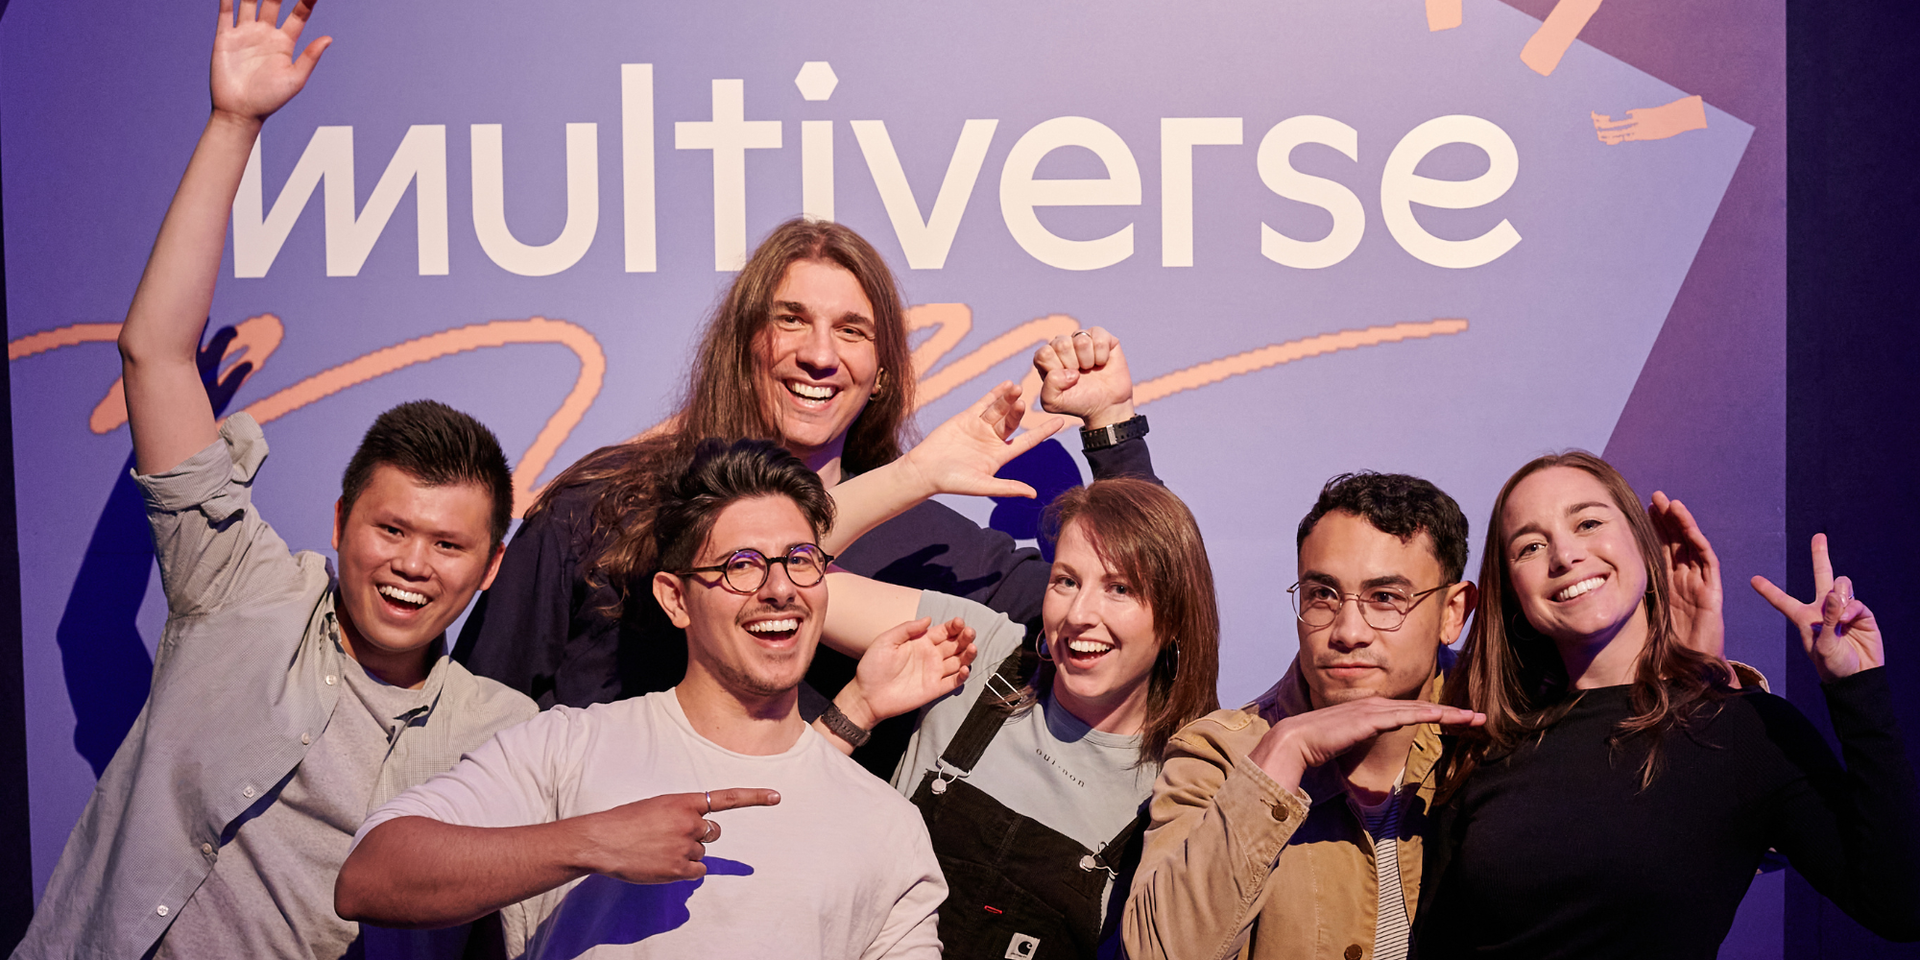 A group of employees striking a funny pose smiling, in front of a Multiverse banner